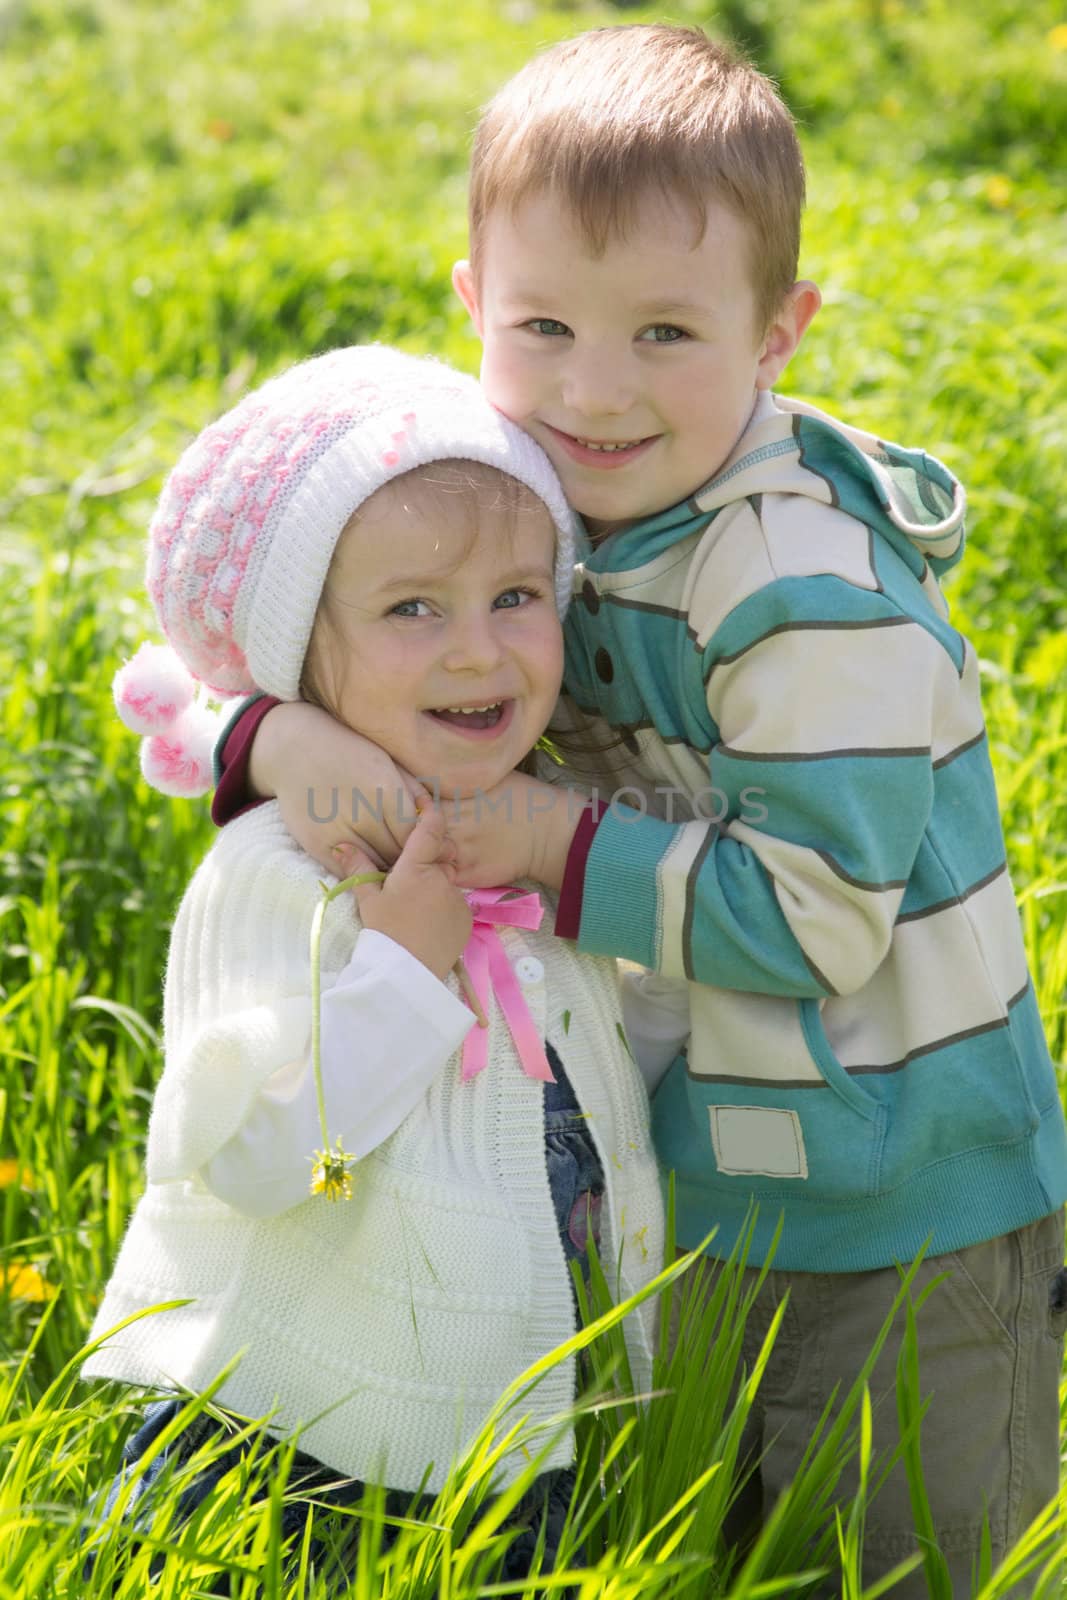 Brother giving hug to sister outdoors in spring